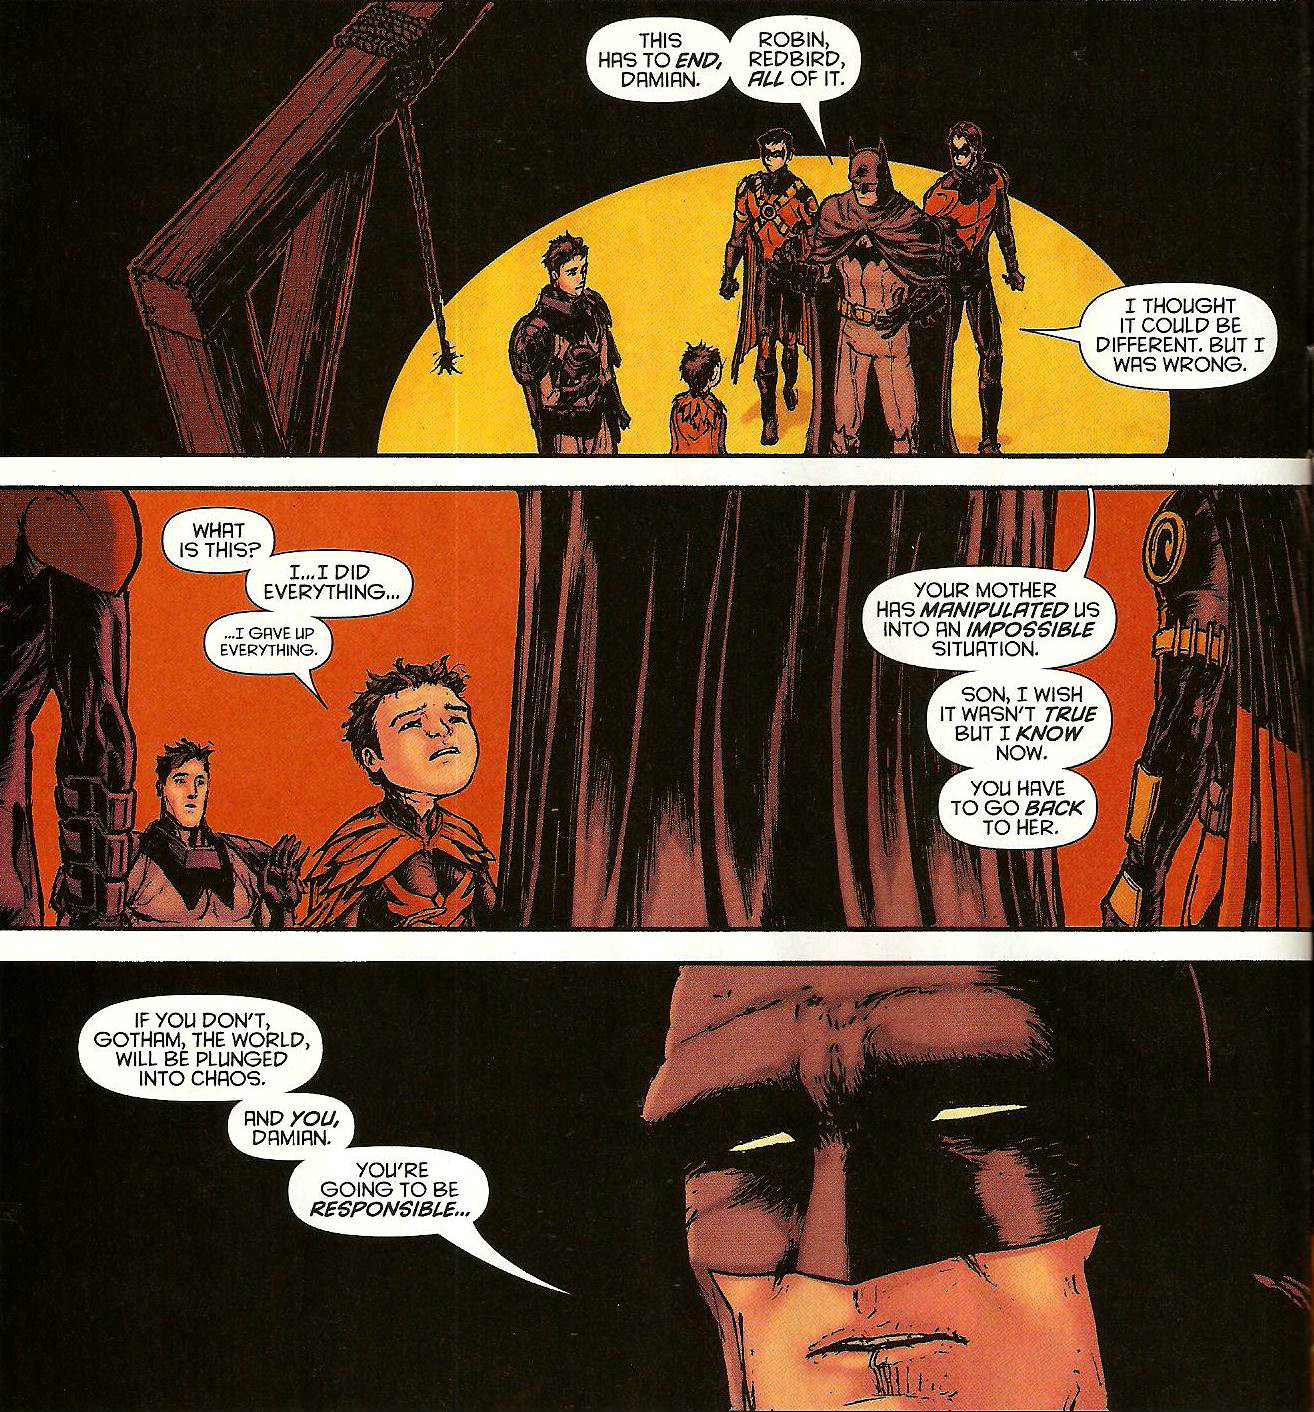 From Batman Incorporated (Vol. 2) #4 (2012)